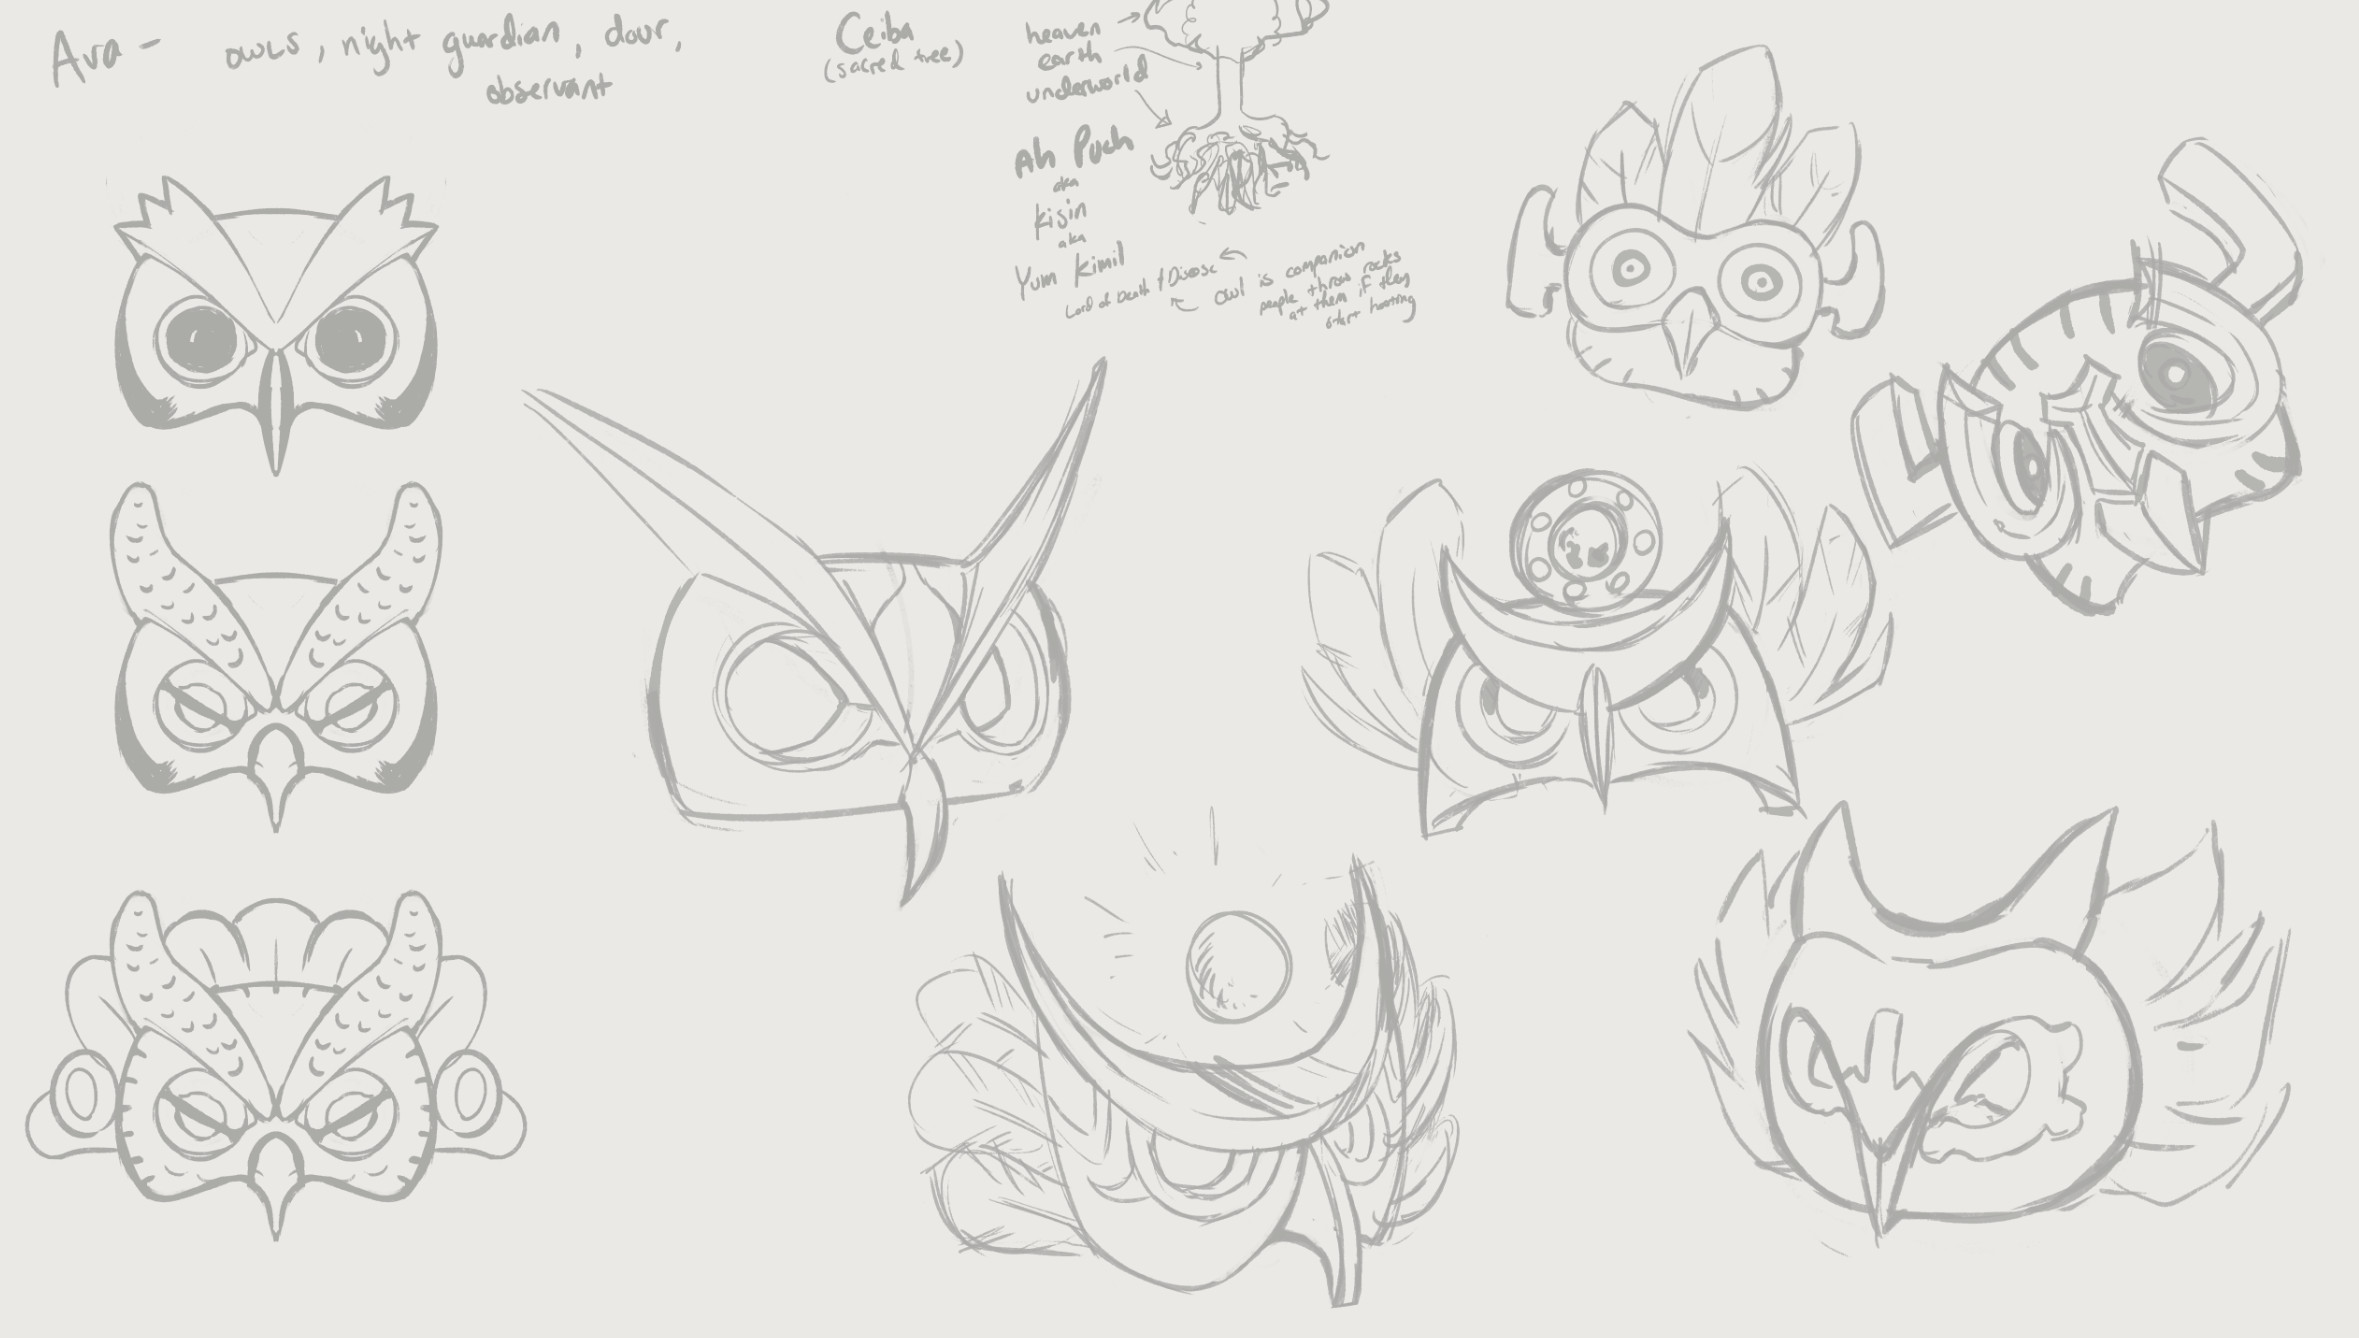 mask style exploration. Sketching in 3d really helped visualize it here. 